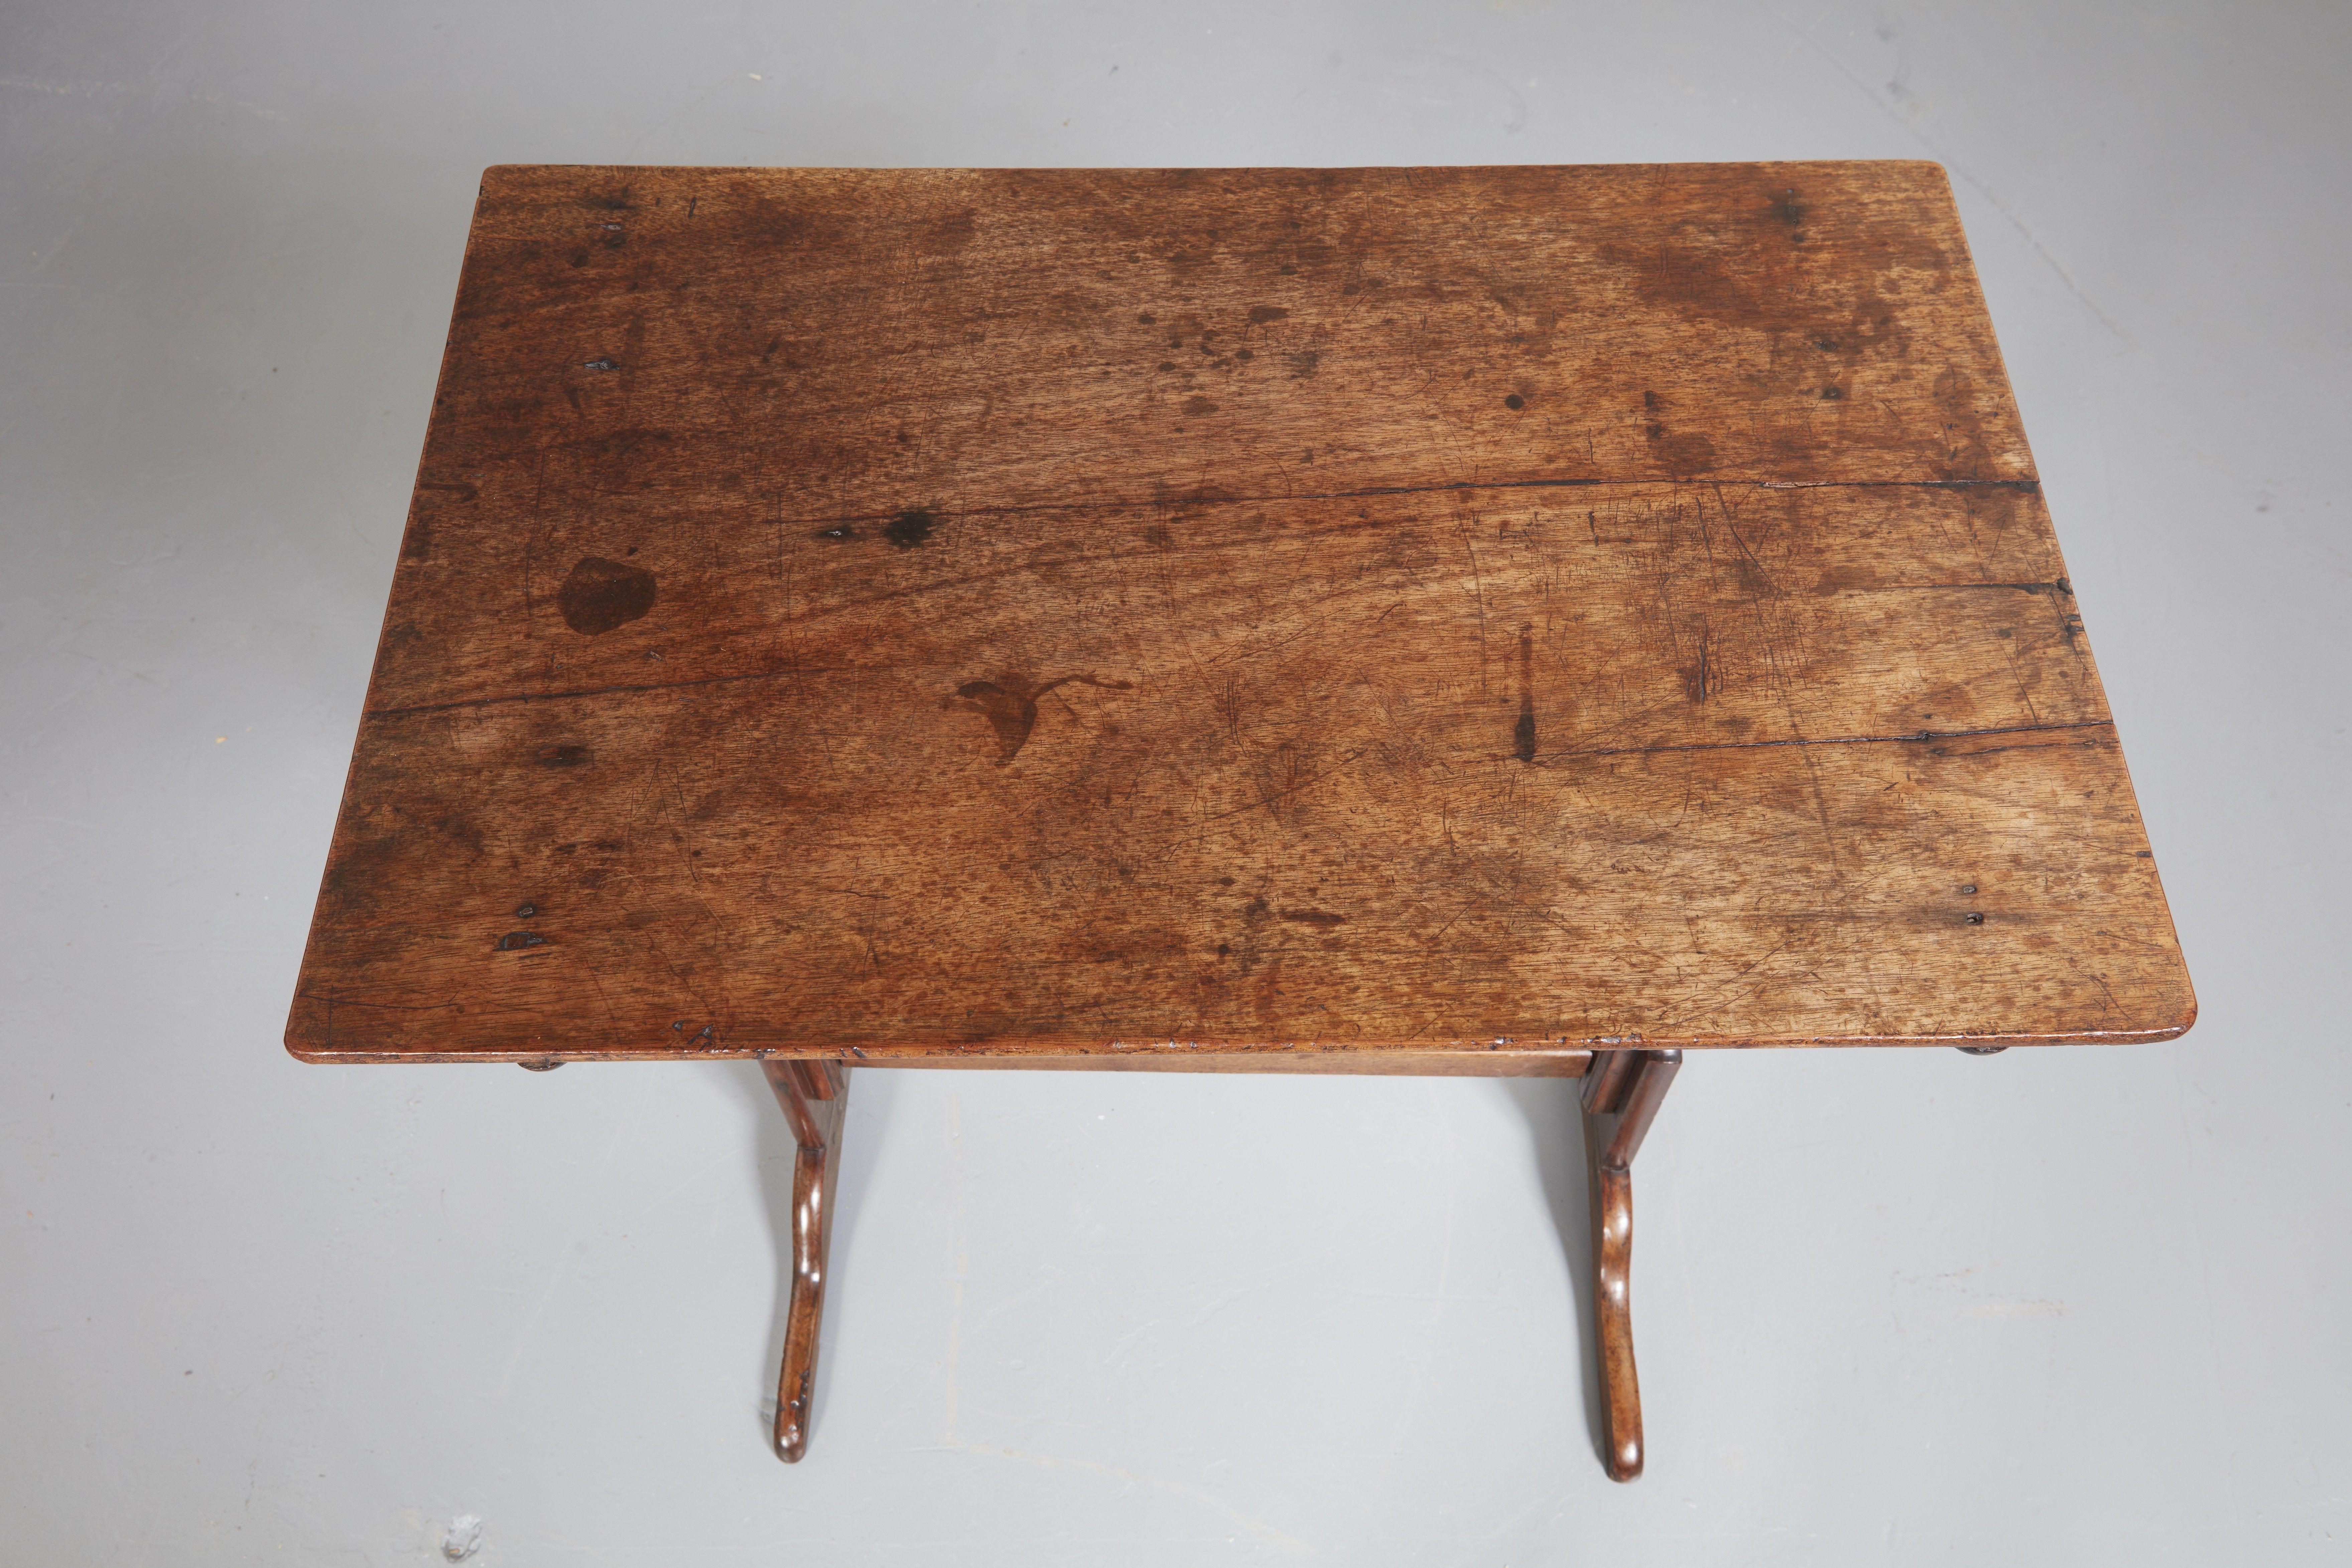 An English country house butler's table in attractively grained light mahogany having a rectangular top over vase splat shaped legs on wide tapered feet joined by a straight stretcher. Finished all the way around. Butler's tables are lightweight